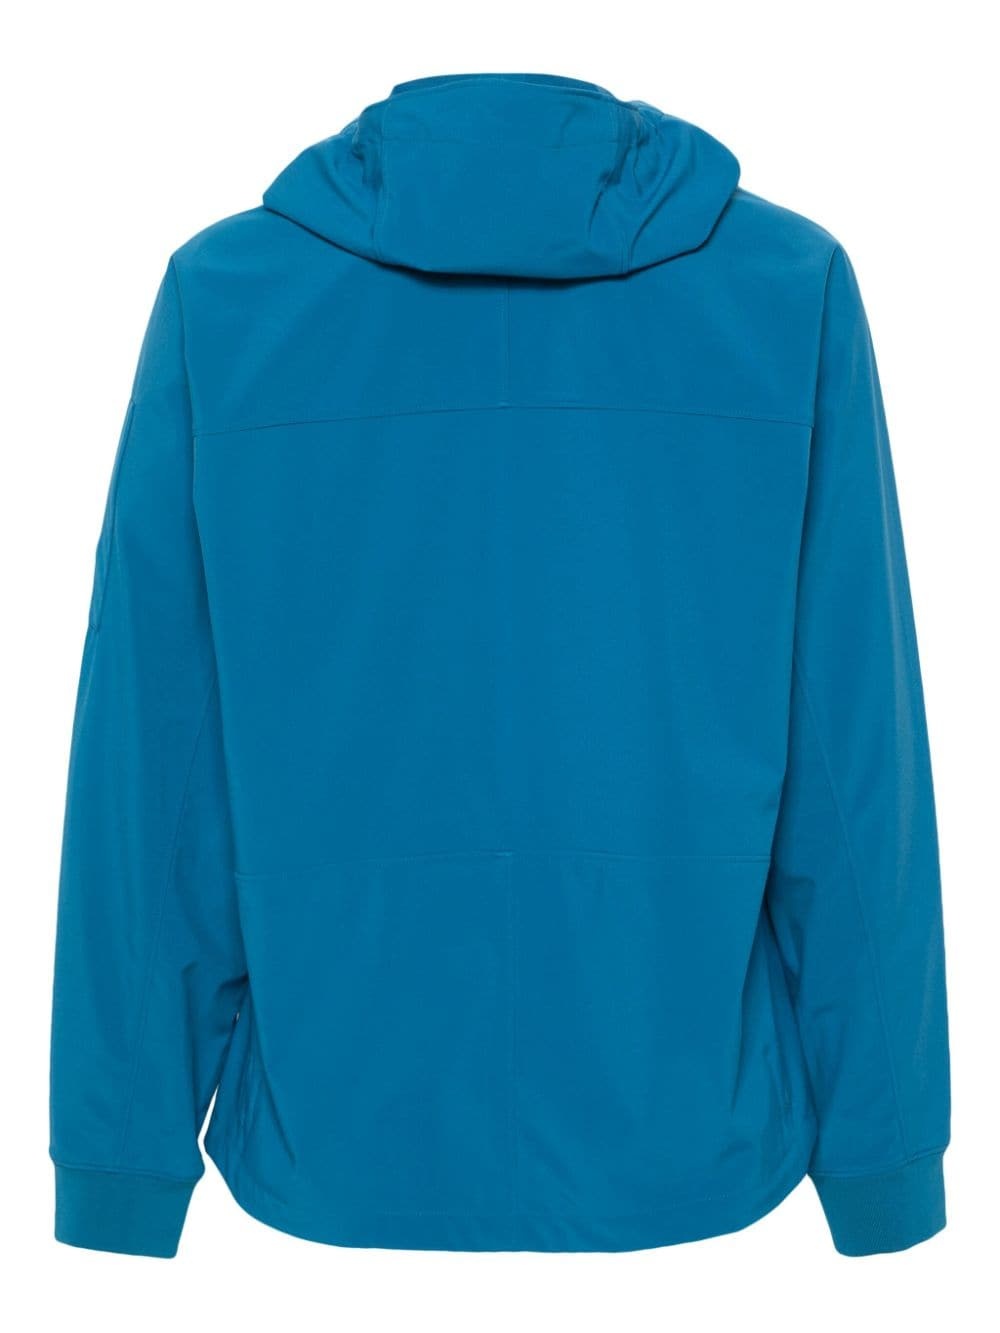 C.P. Shell-R hooded jacket - 2